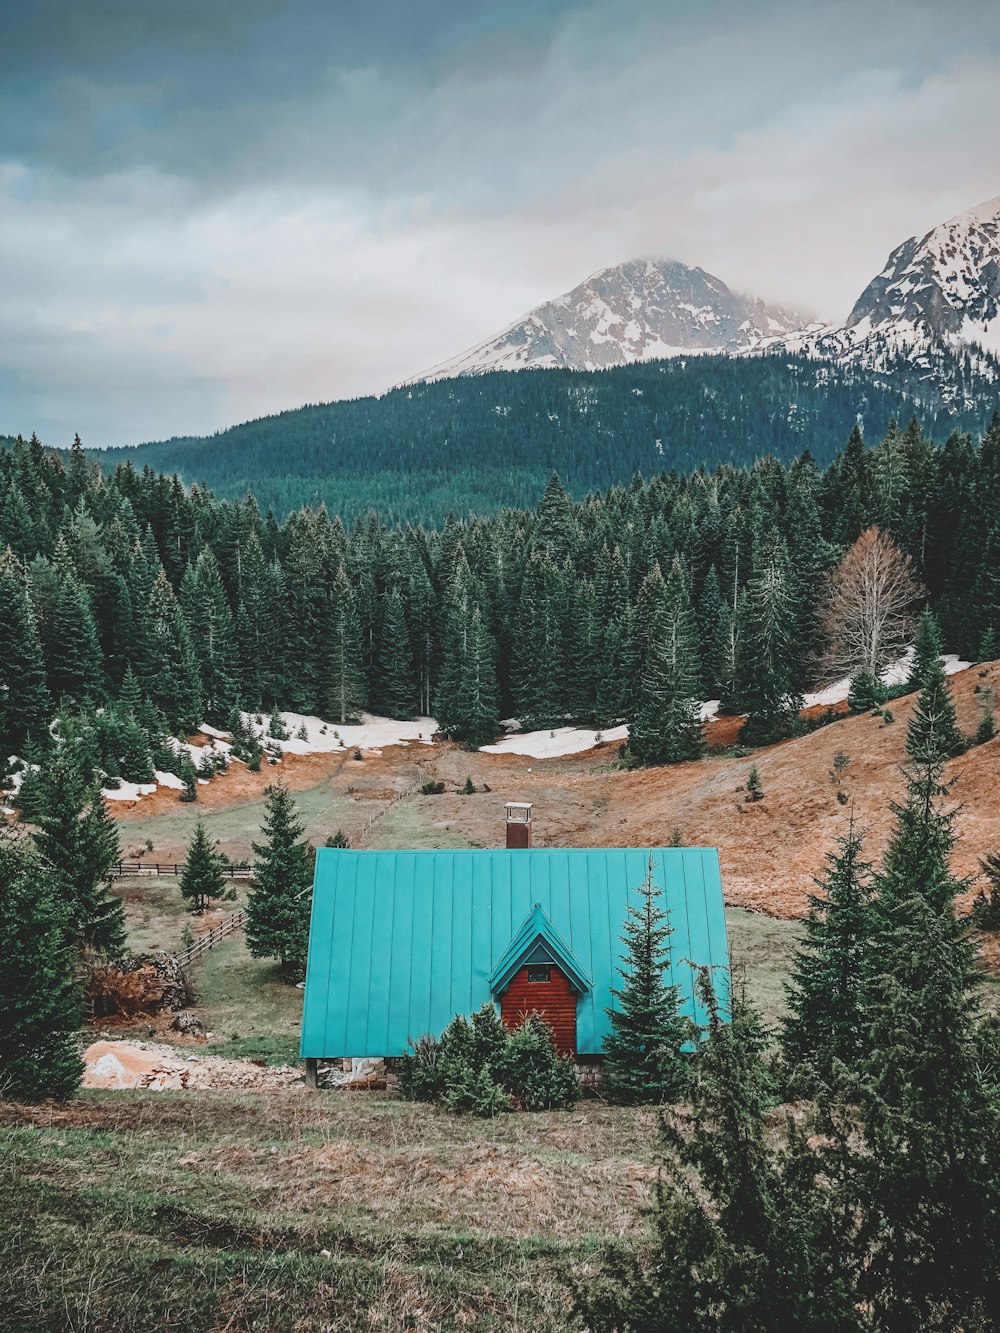 teal roof house surrounded by pine trees